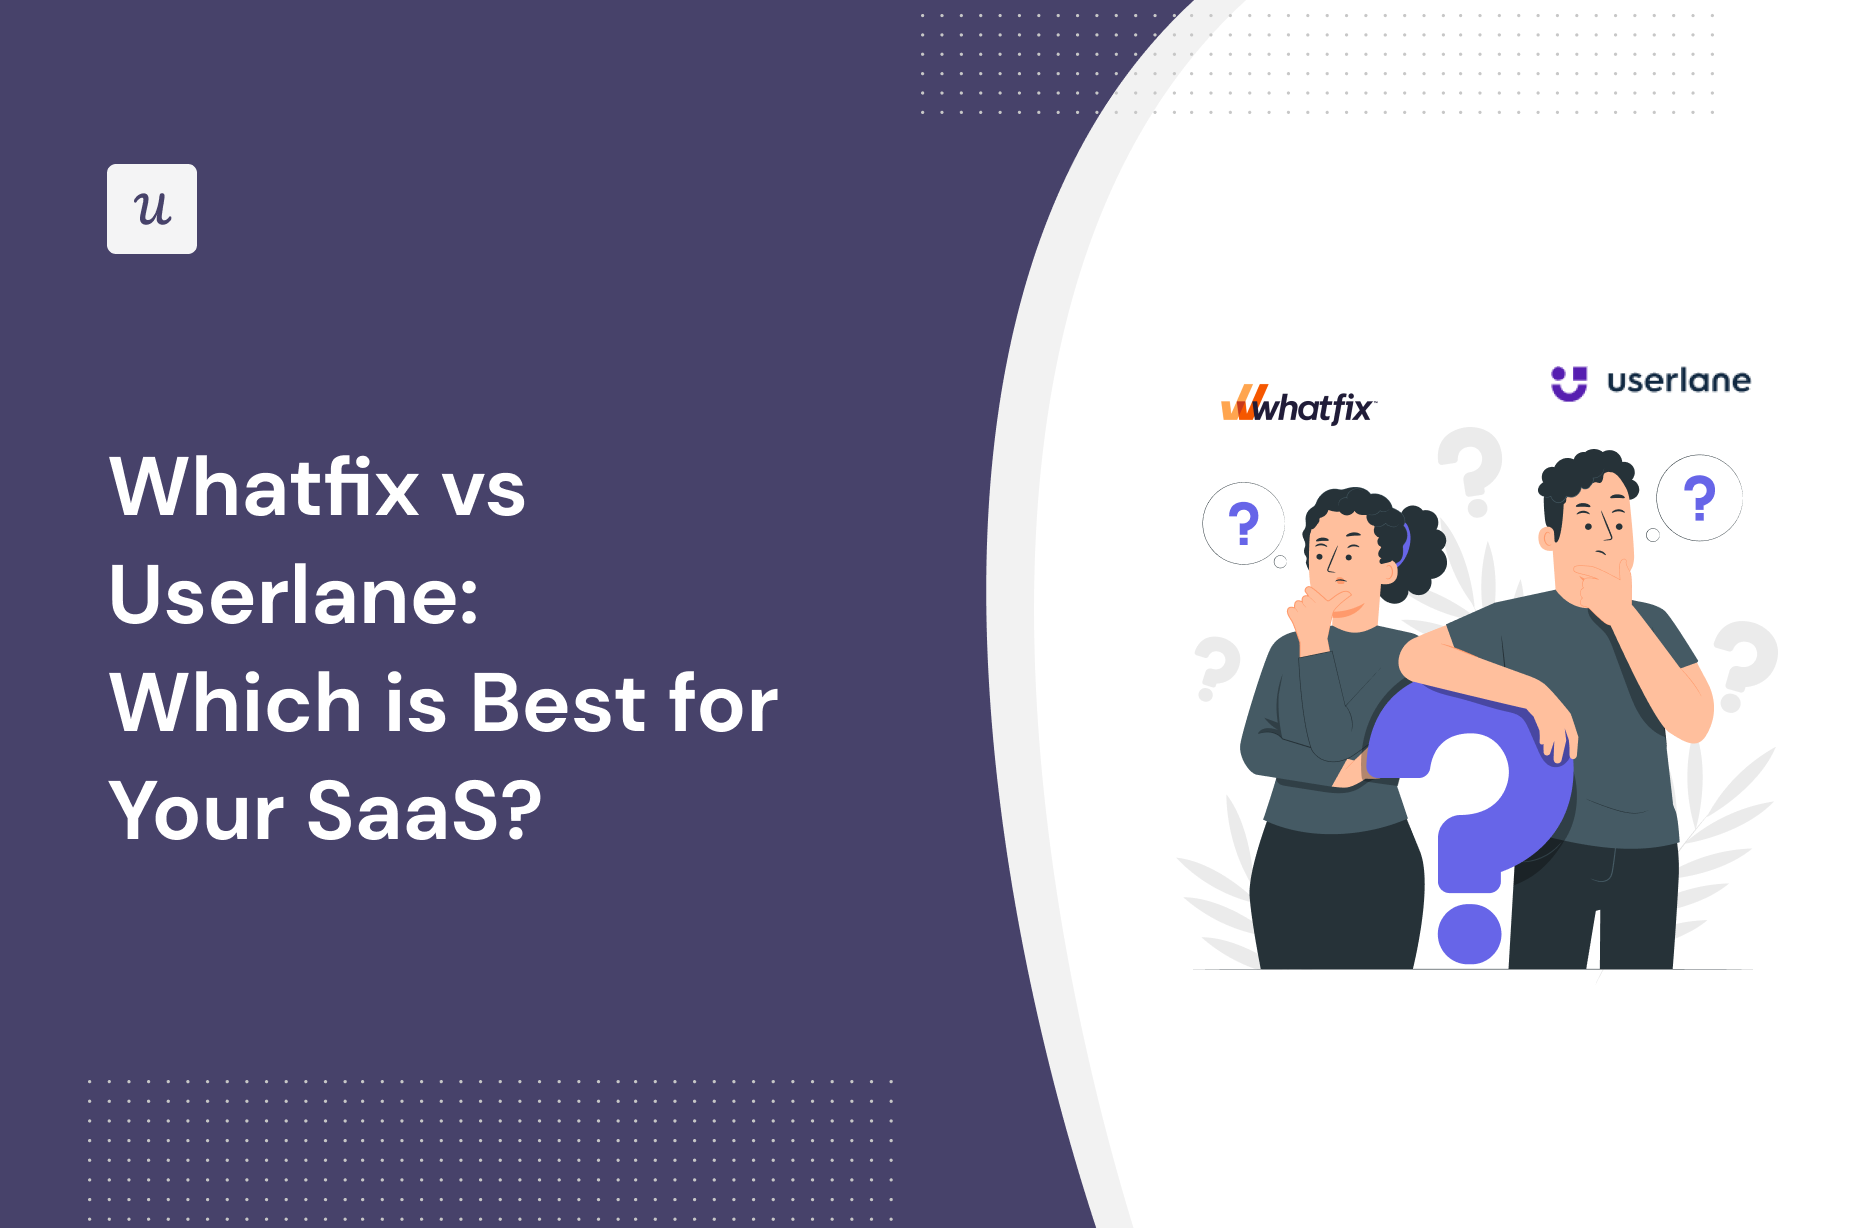 Whatfix vs Userlane: Which is Best for Your SaaS?